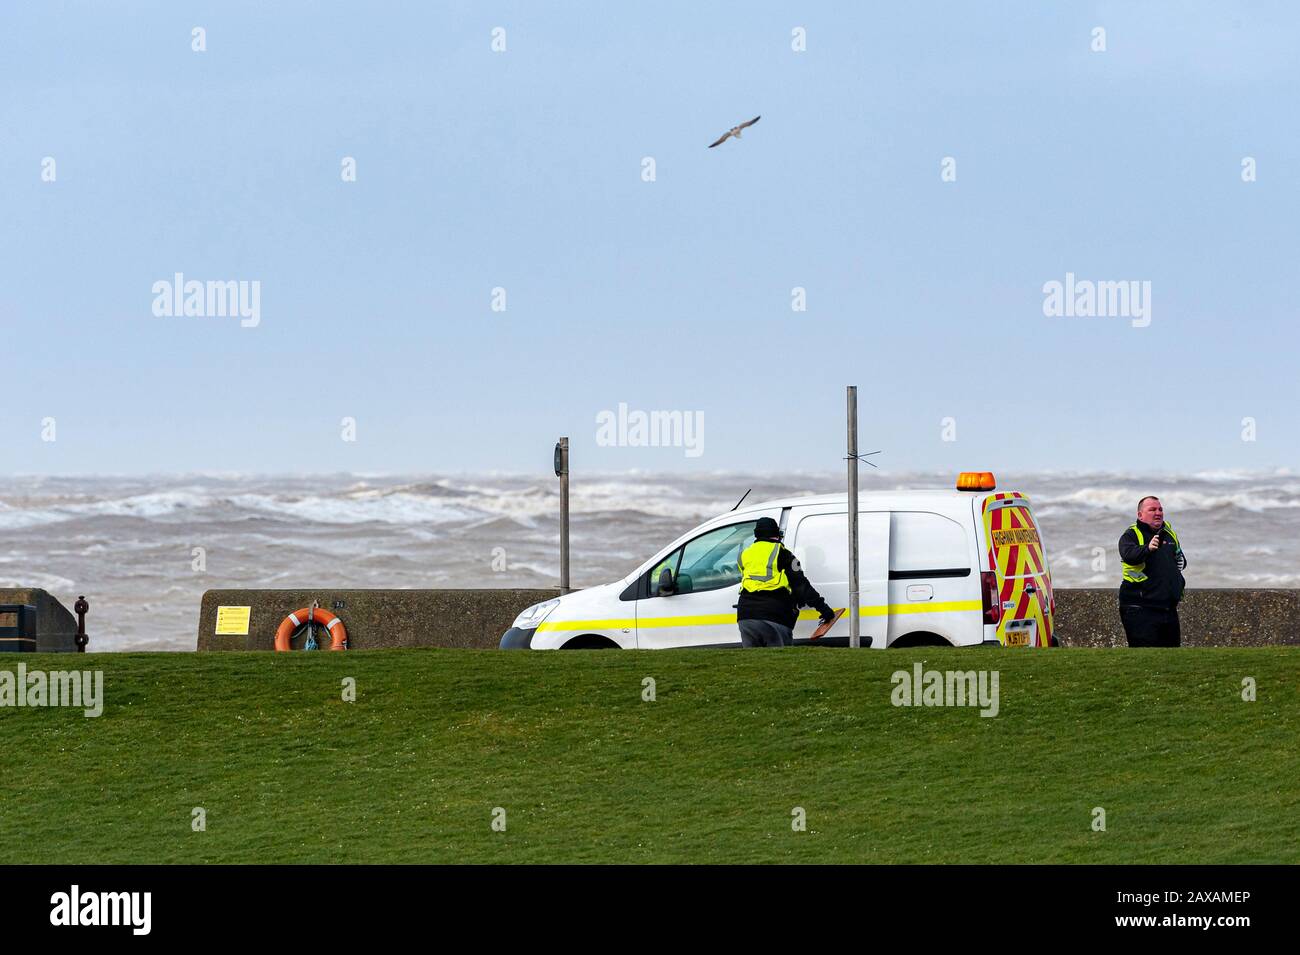 New Brighton, Wirral, UK. 11th February 2020. The aftermath of Storm Ciara continues to hit New Brighton, on the Wirral peninsula.  With strong gale force winds and flooding, the cleanup operation now begins.  Credit: Paul Warburton/Alamy Live News Stock Photo